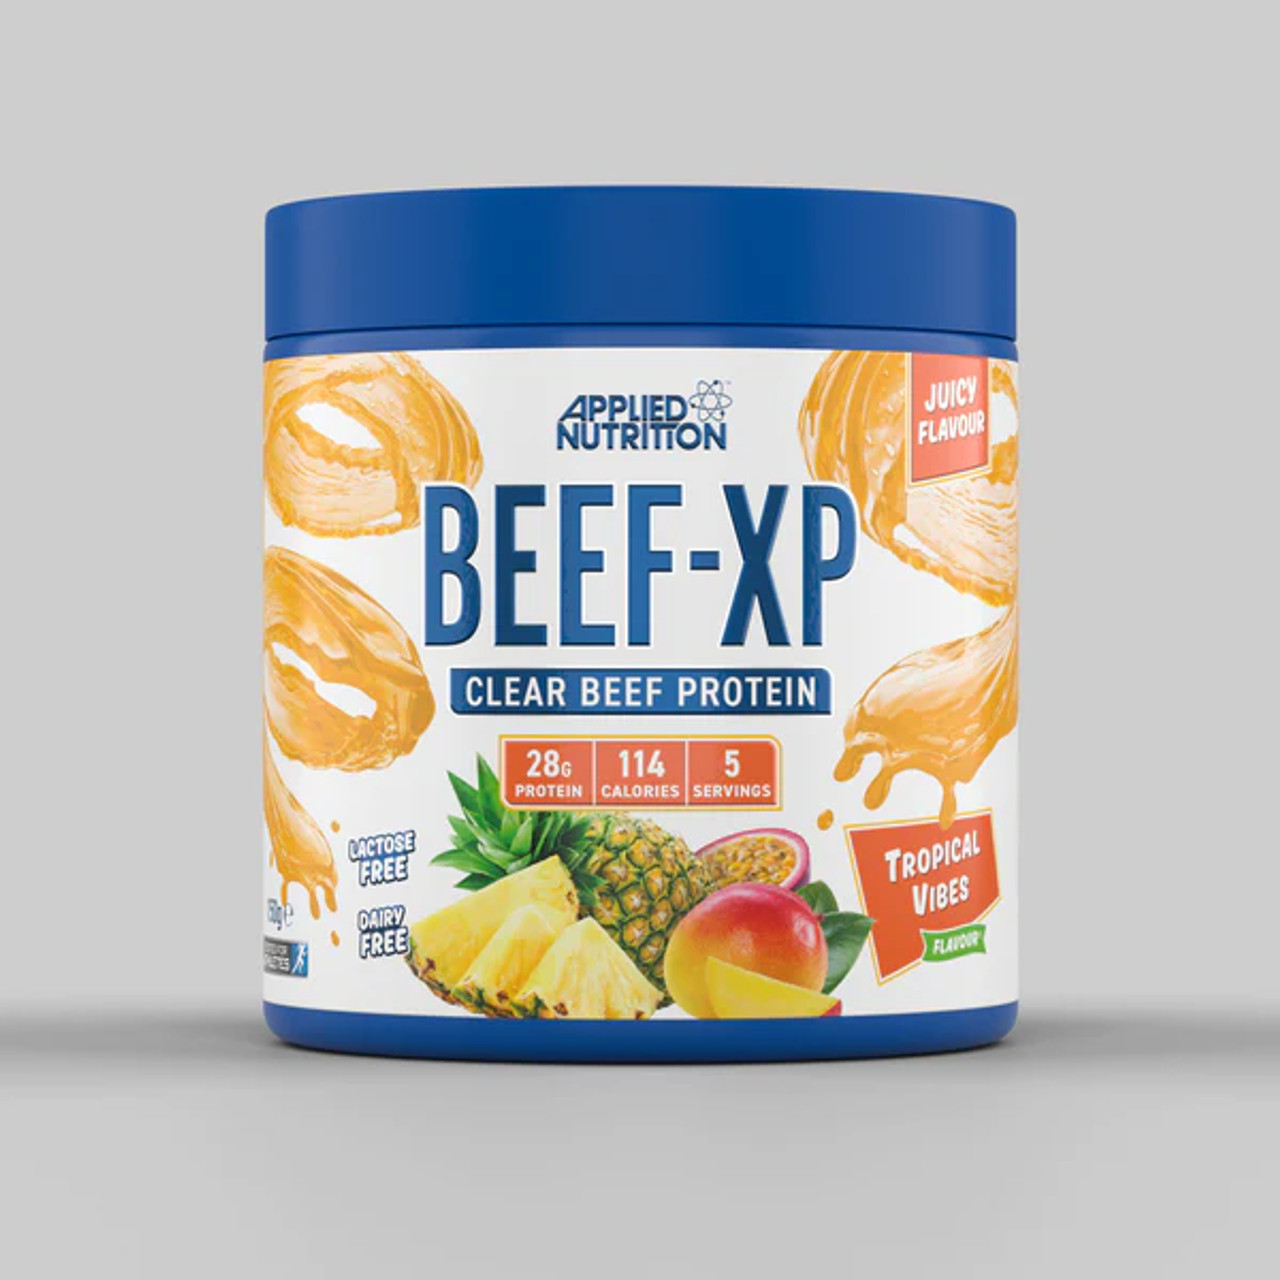 CLEAR HYDROLYSED BEEF-XP PROTEIN - 150g